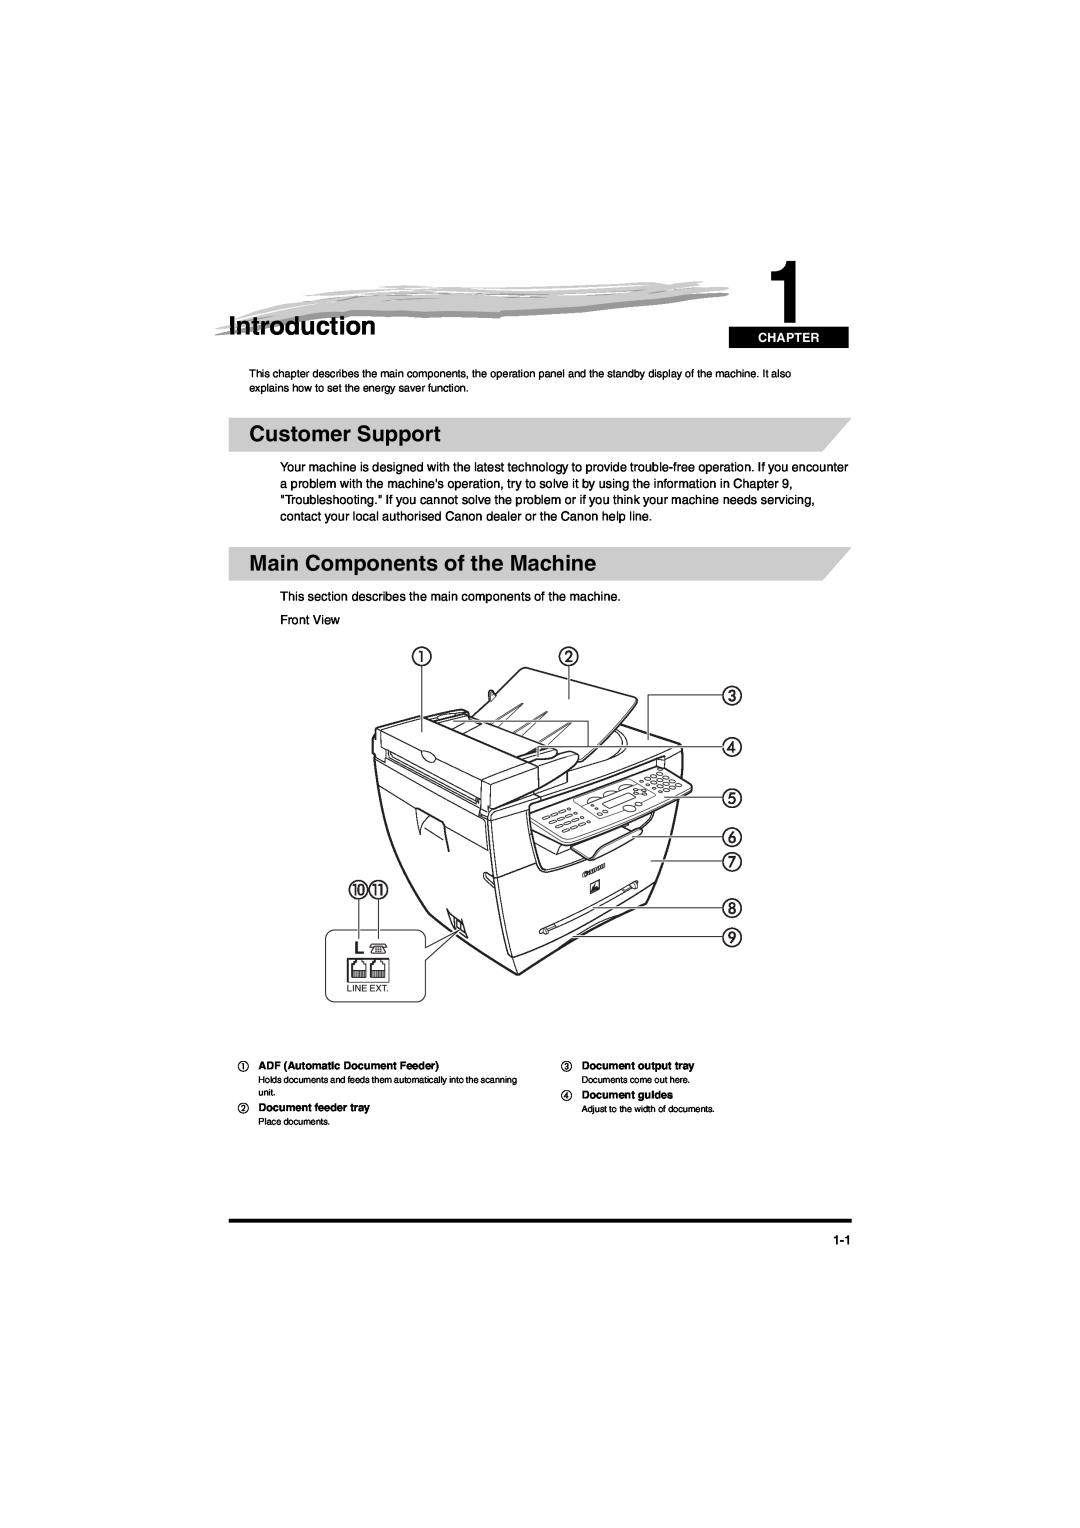 Canon MF5650 manual Introduction, Customer Support, Main Components of the Machine, Chapter 